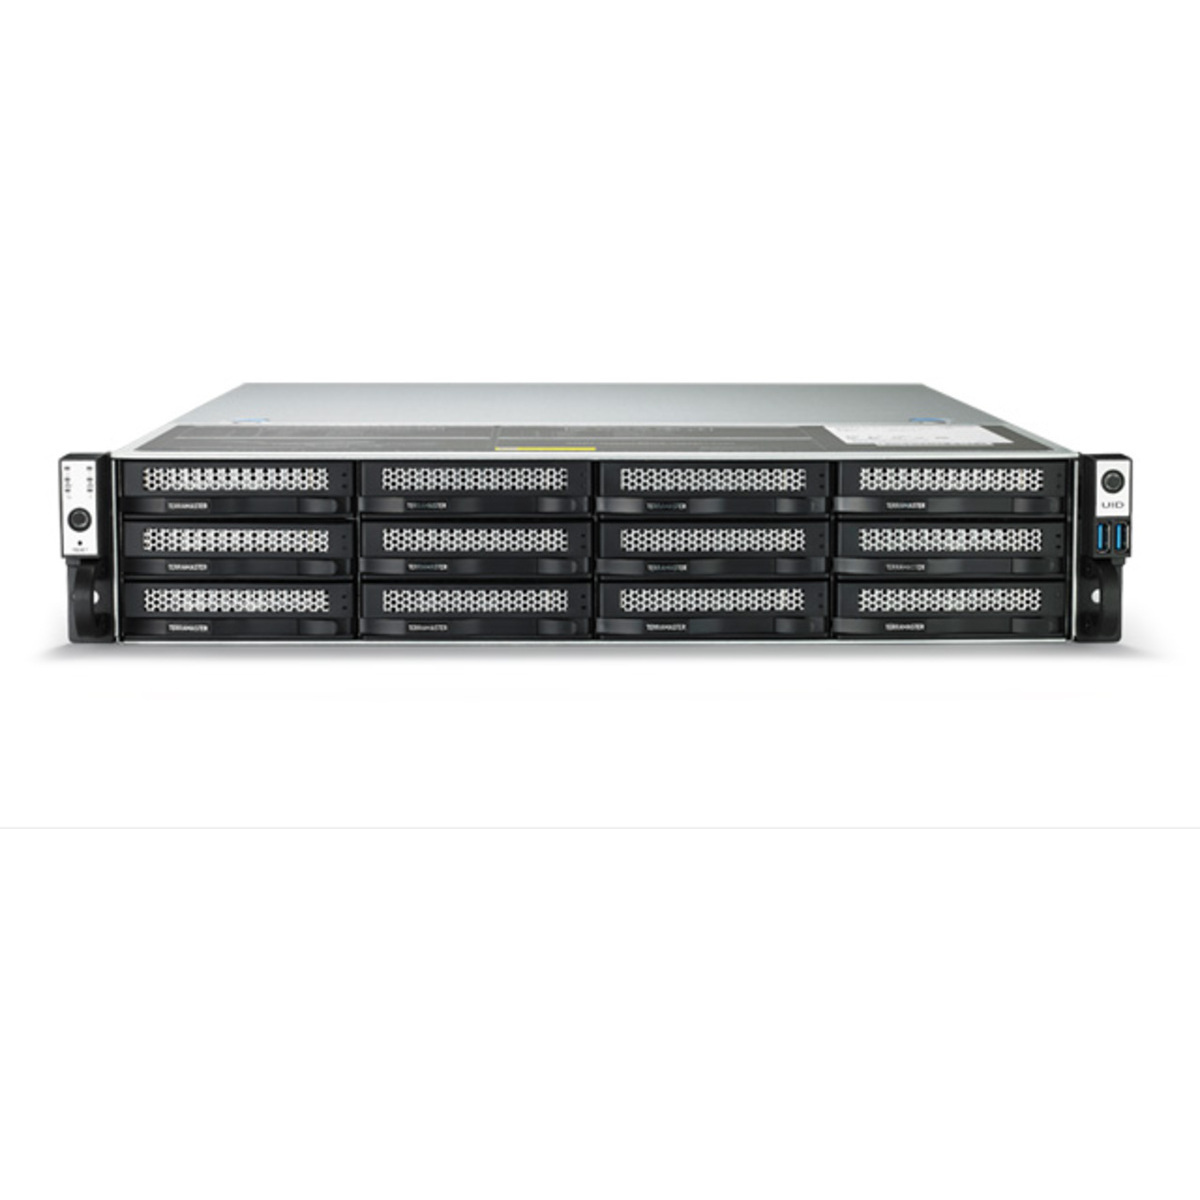 TerraMaster U12-722-2224 98tb 12-Bay RackMount Large Business / Enterprise NAS - Network Attached Storage Device 7x14tb Seagate IronWolf Pro ST14000NT001 3.5 7200rpm SATA 6Gb/s HDD NAS Class Drives Installed - Burn-In Tested U12-722-2224